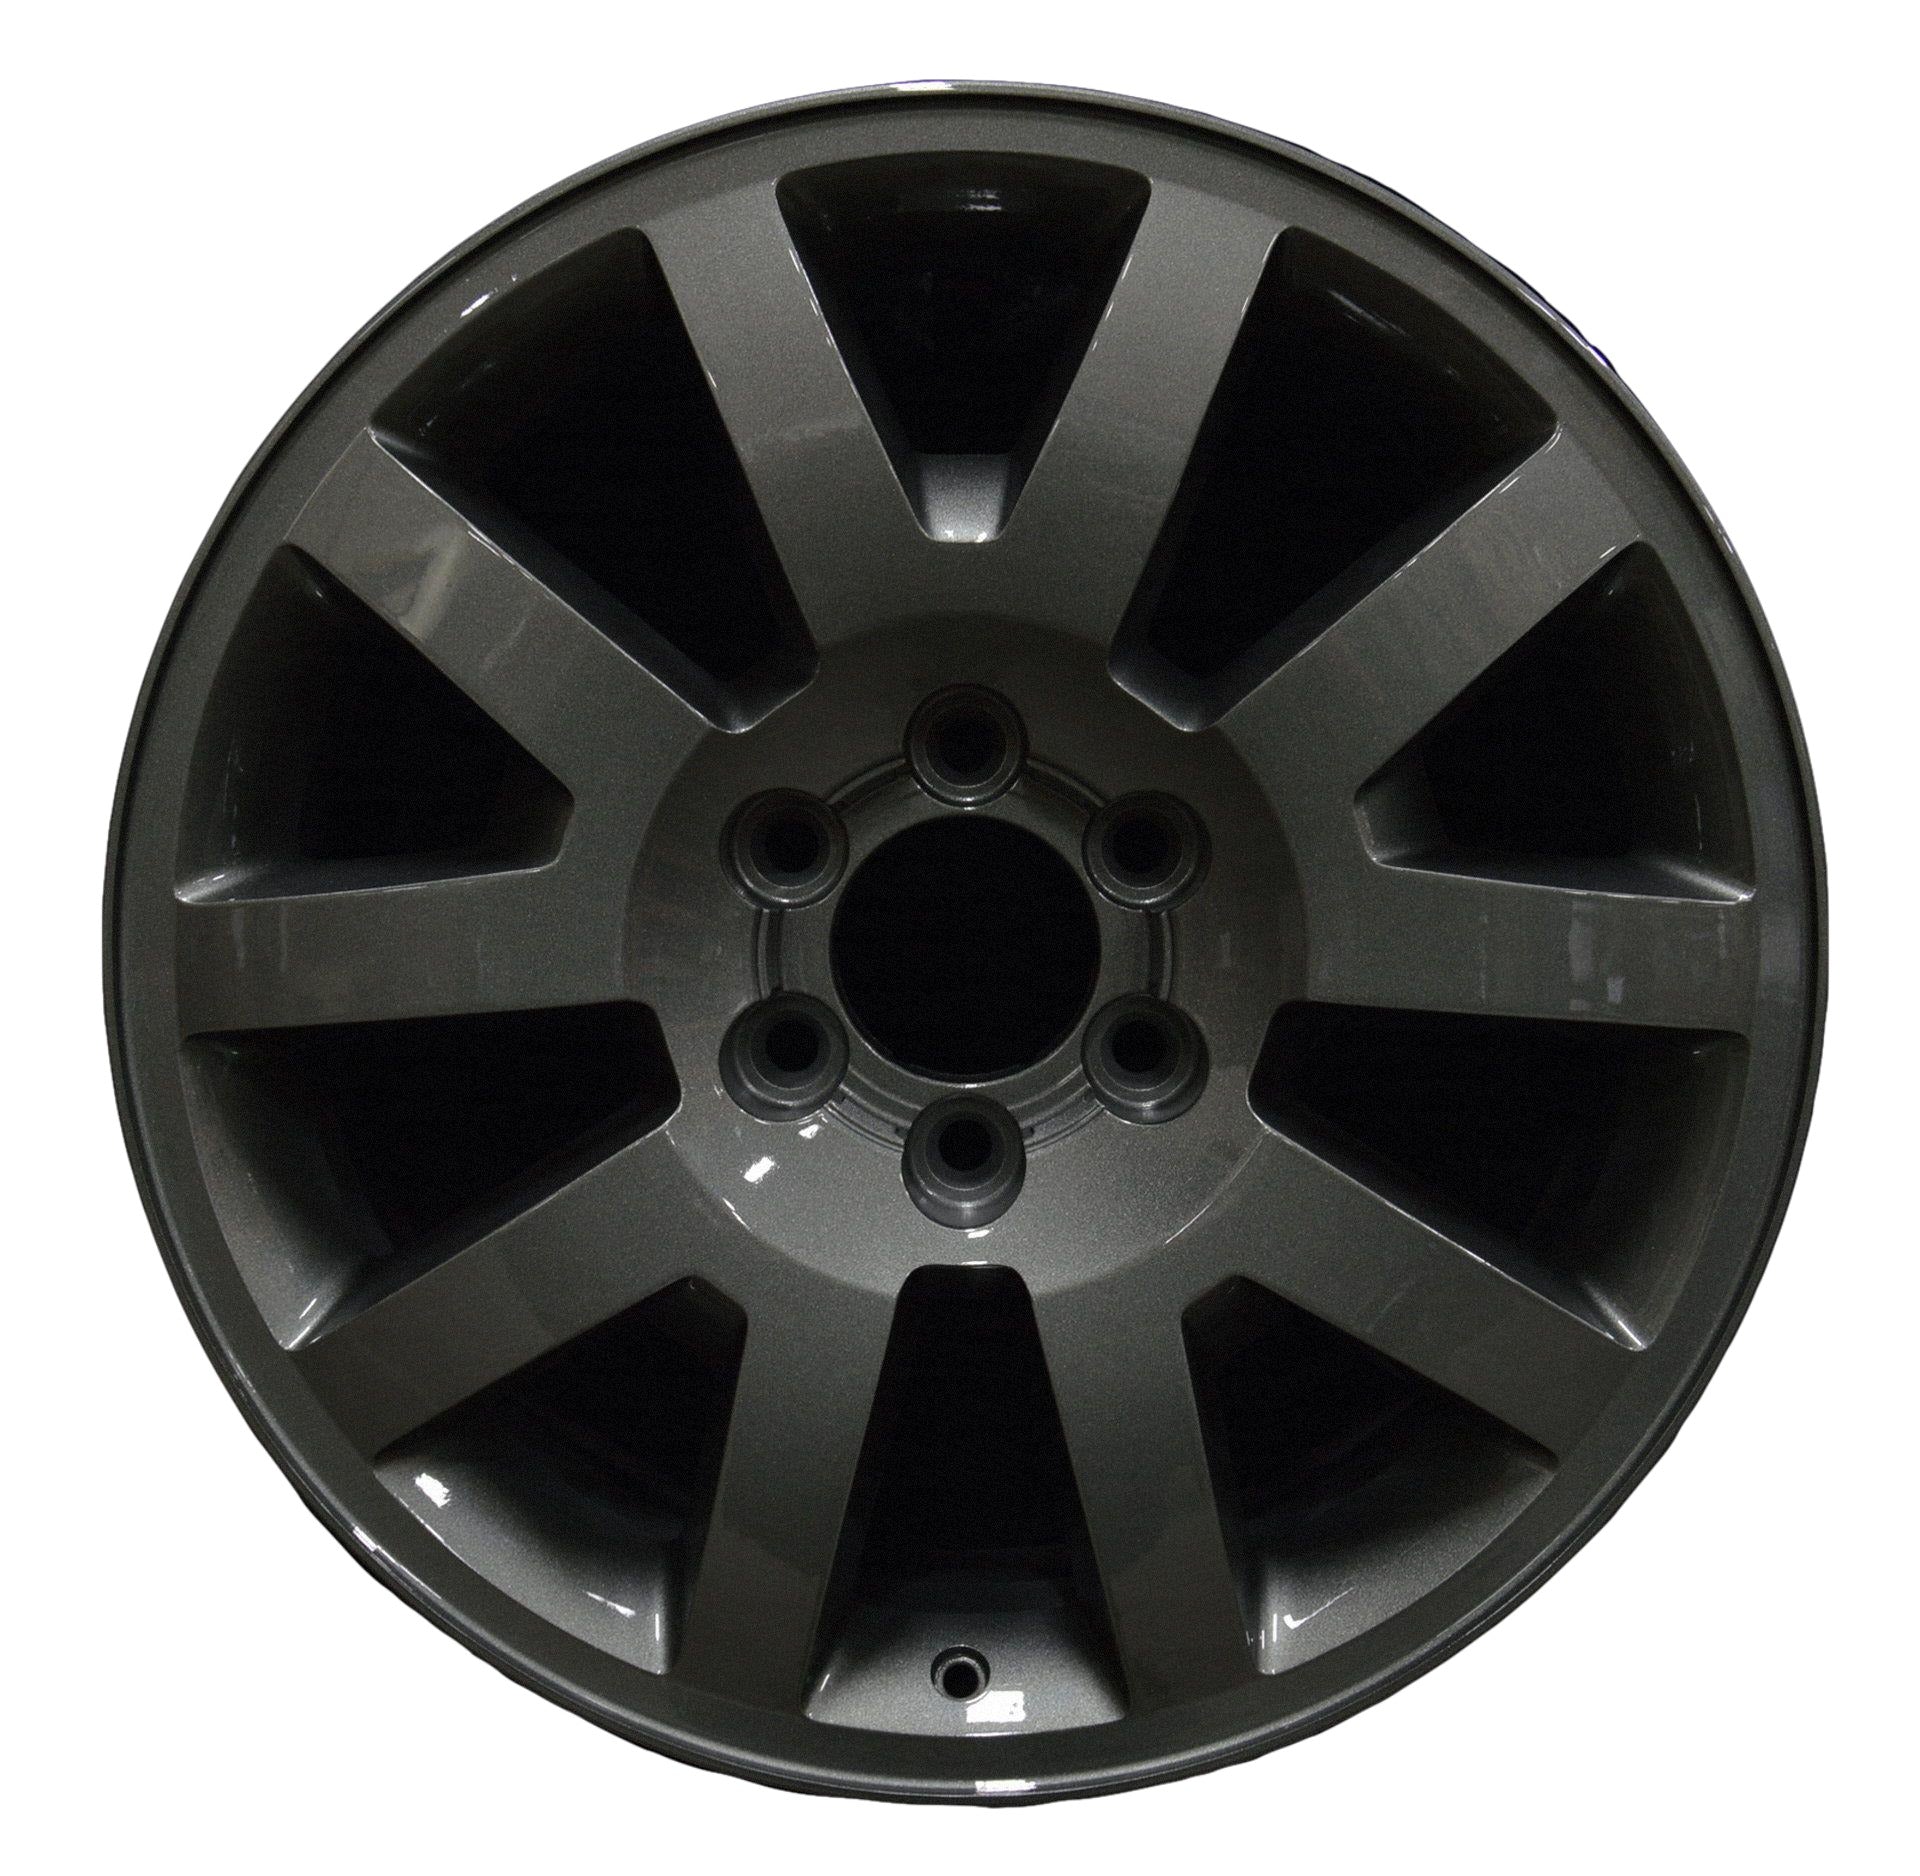 Ford Expedition  2011, 2012, 2013, 2014 Factory OEM Car Wheel Size 20x8.5 Alloy WAO.3789.LC46.FF